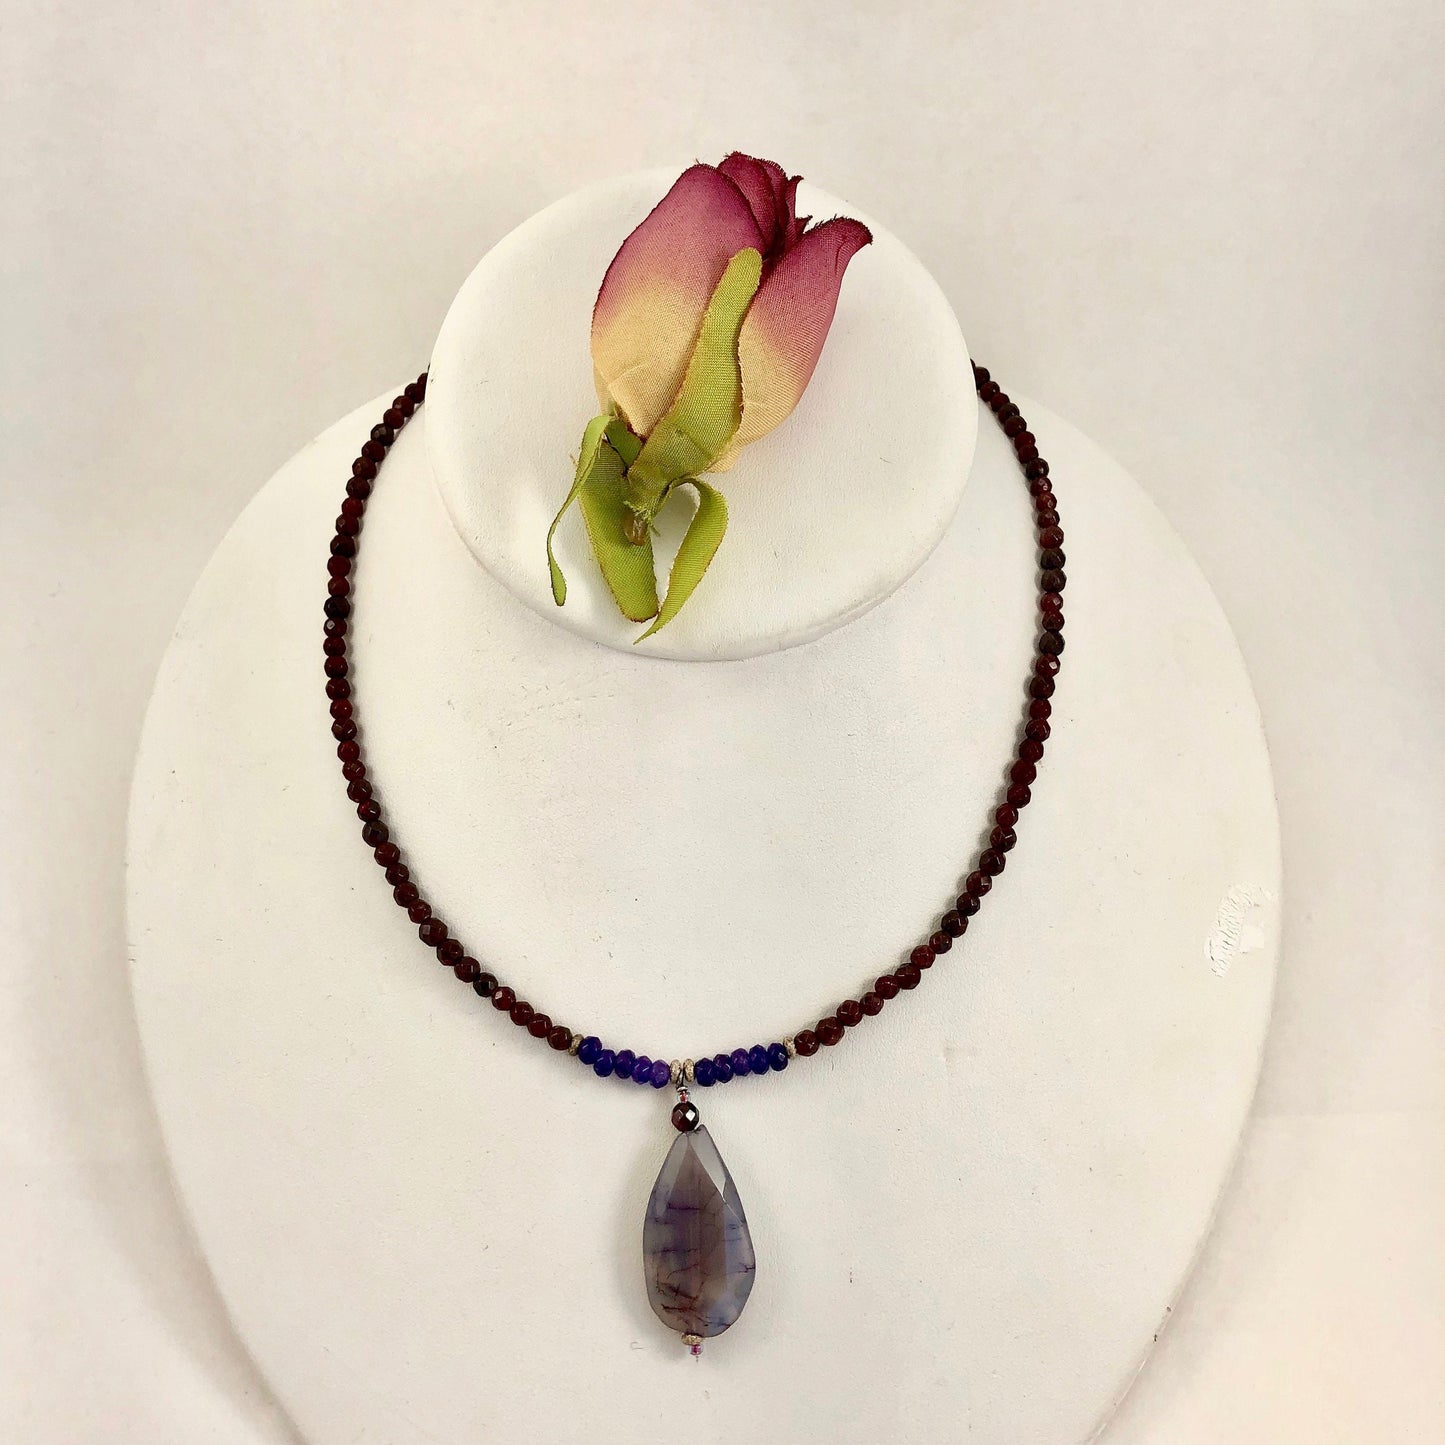 Stunning garnet, lapis and agate beaded necklace accented with  sterling silver swirl beads.